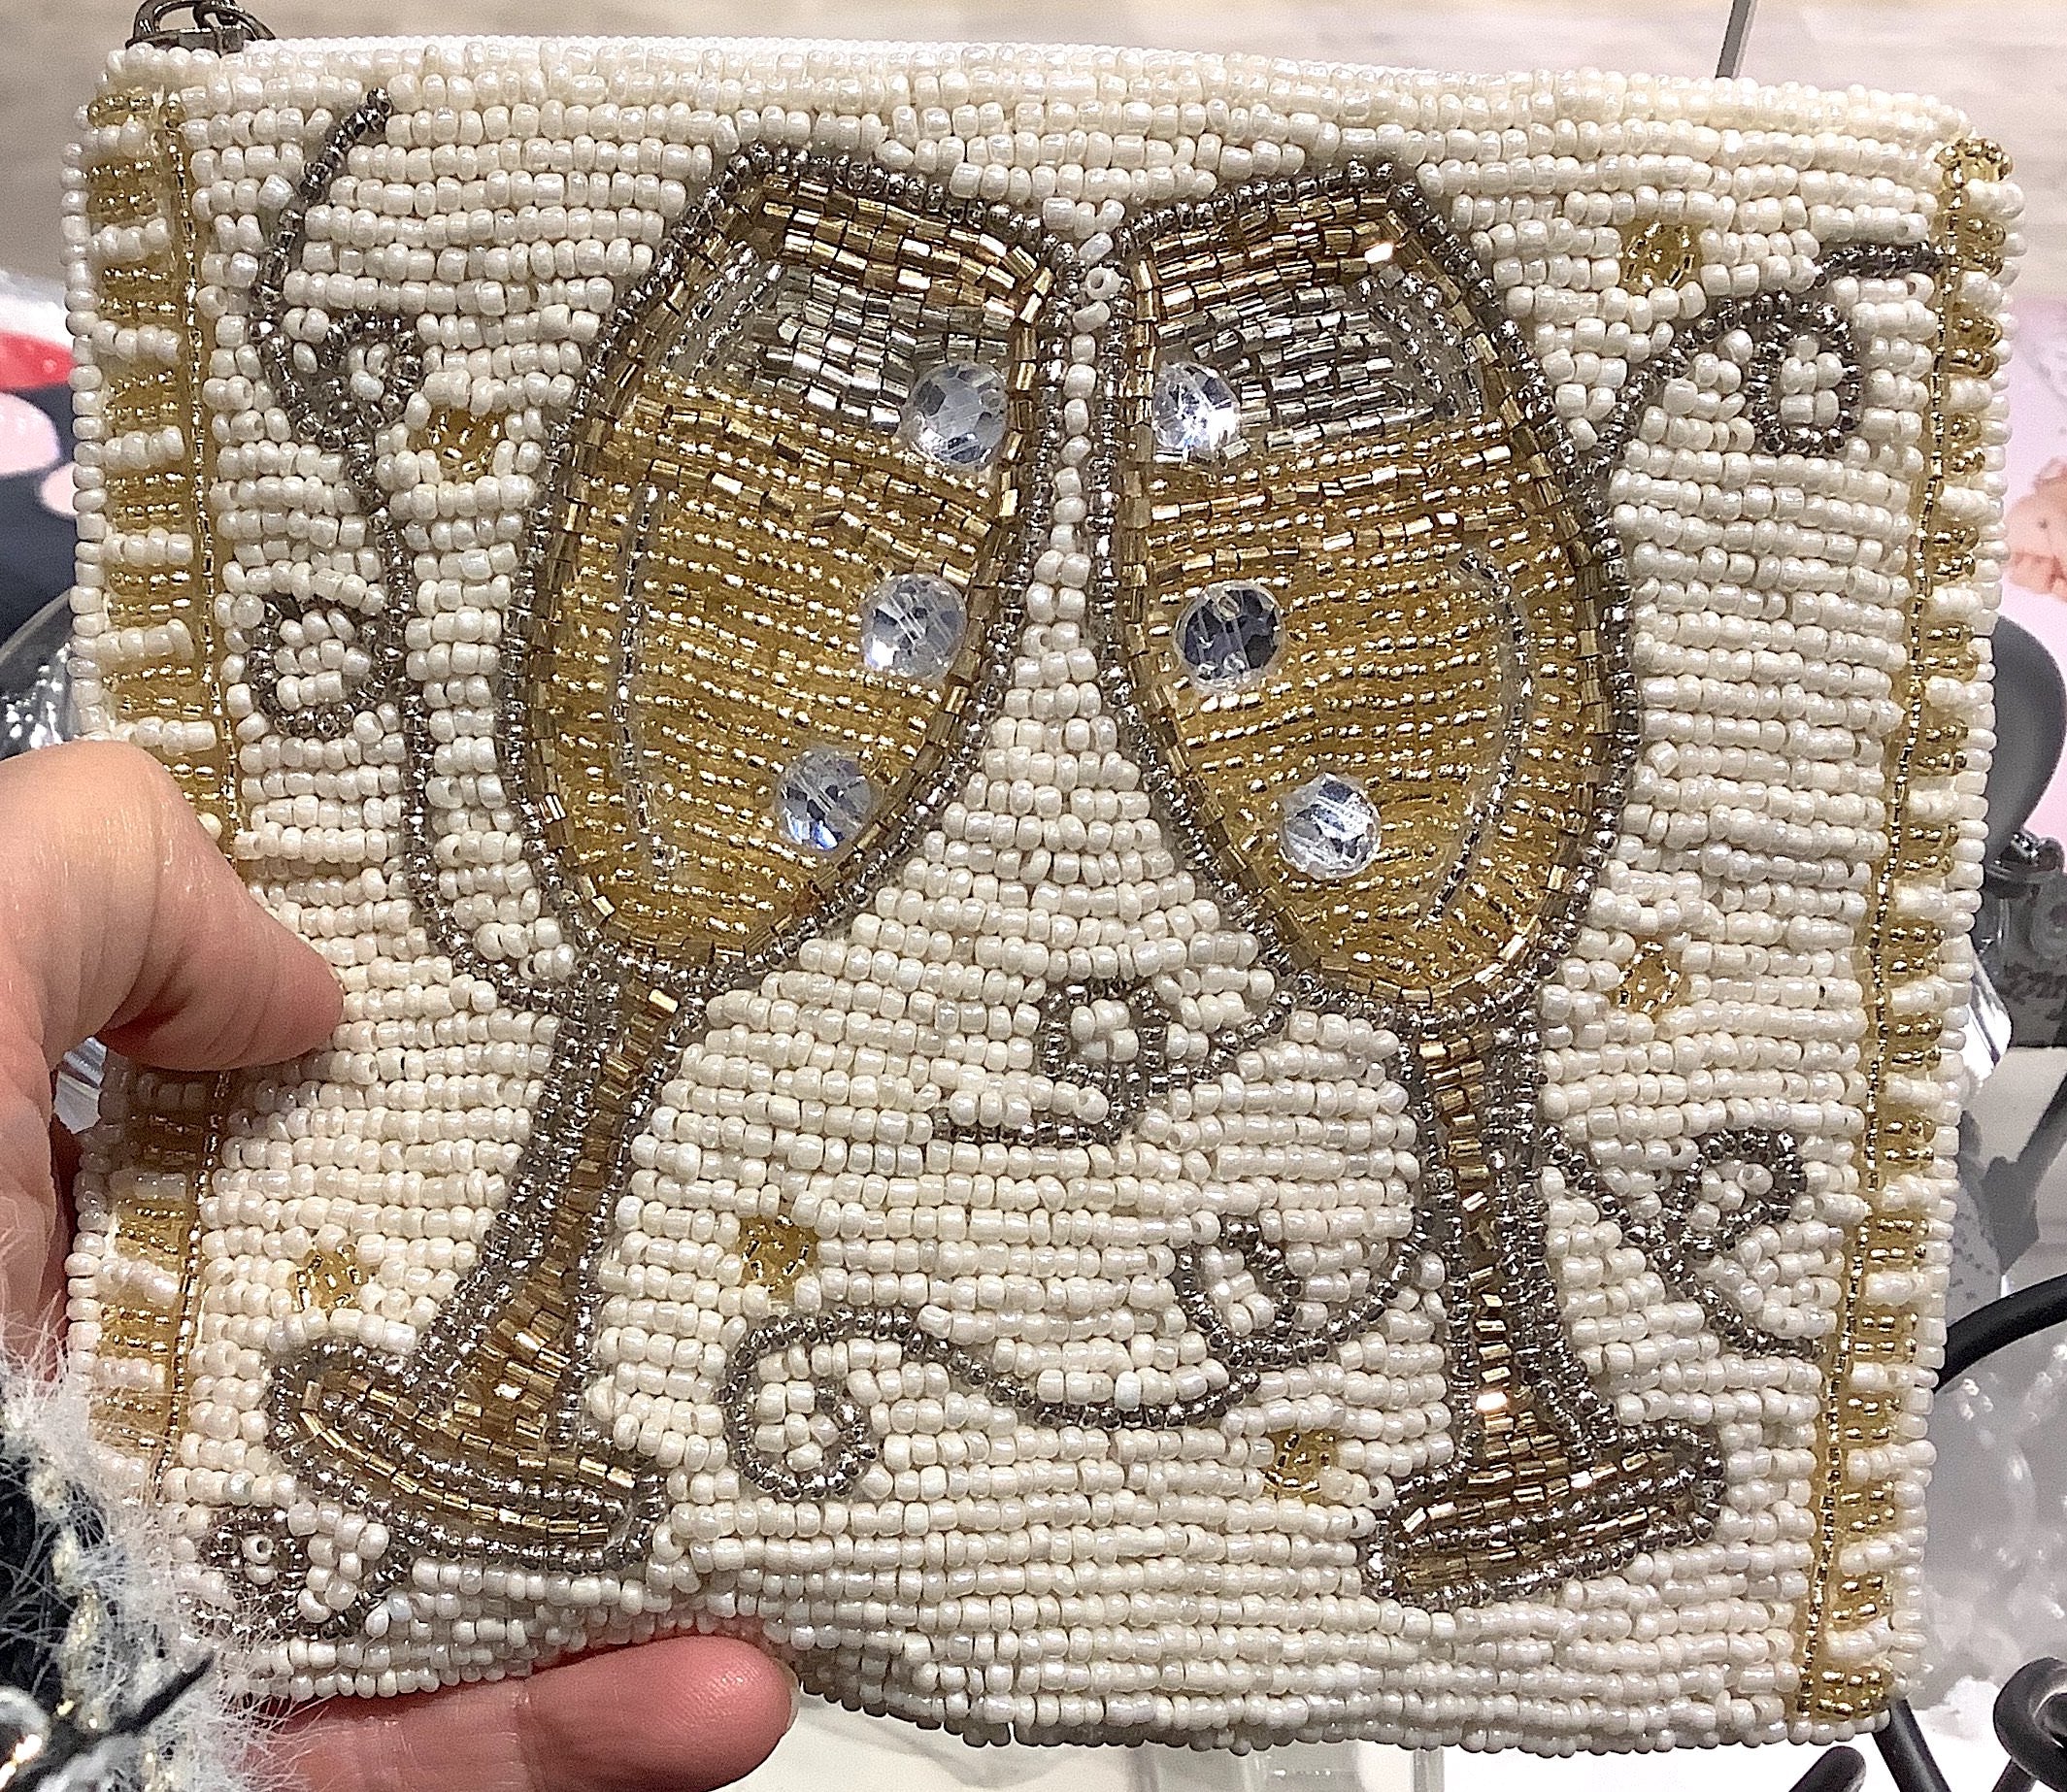 "We’ll Toast to That" Beaded Cocktail Handbag